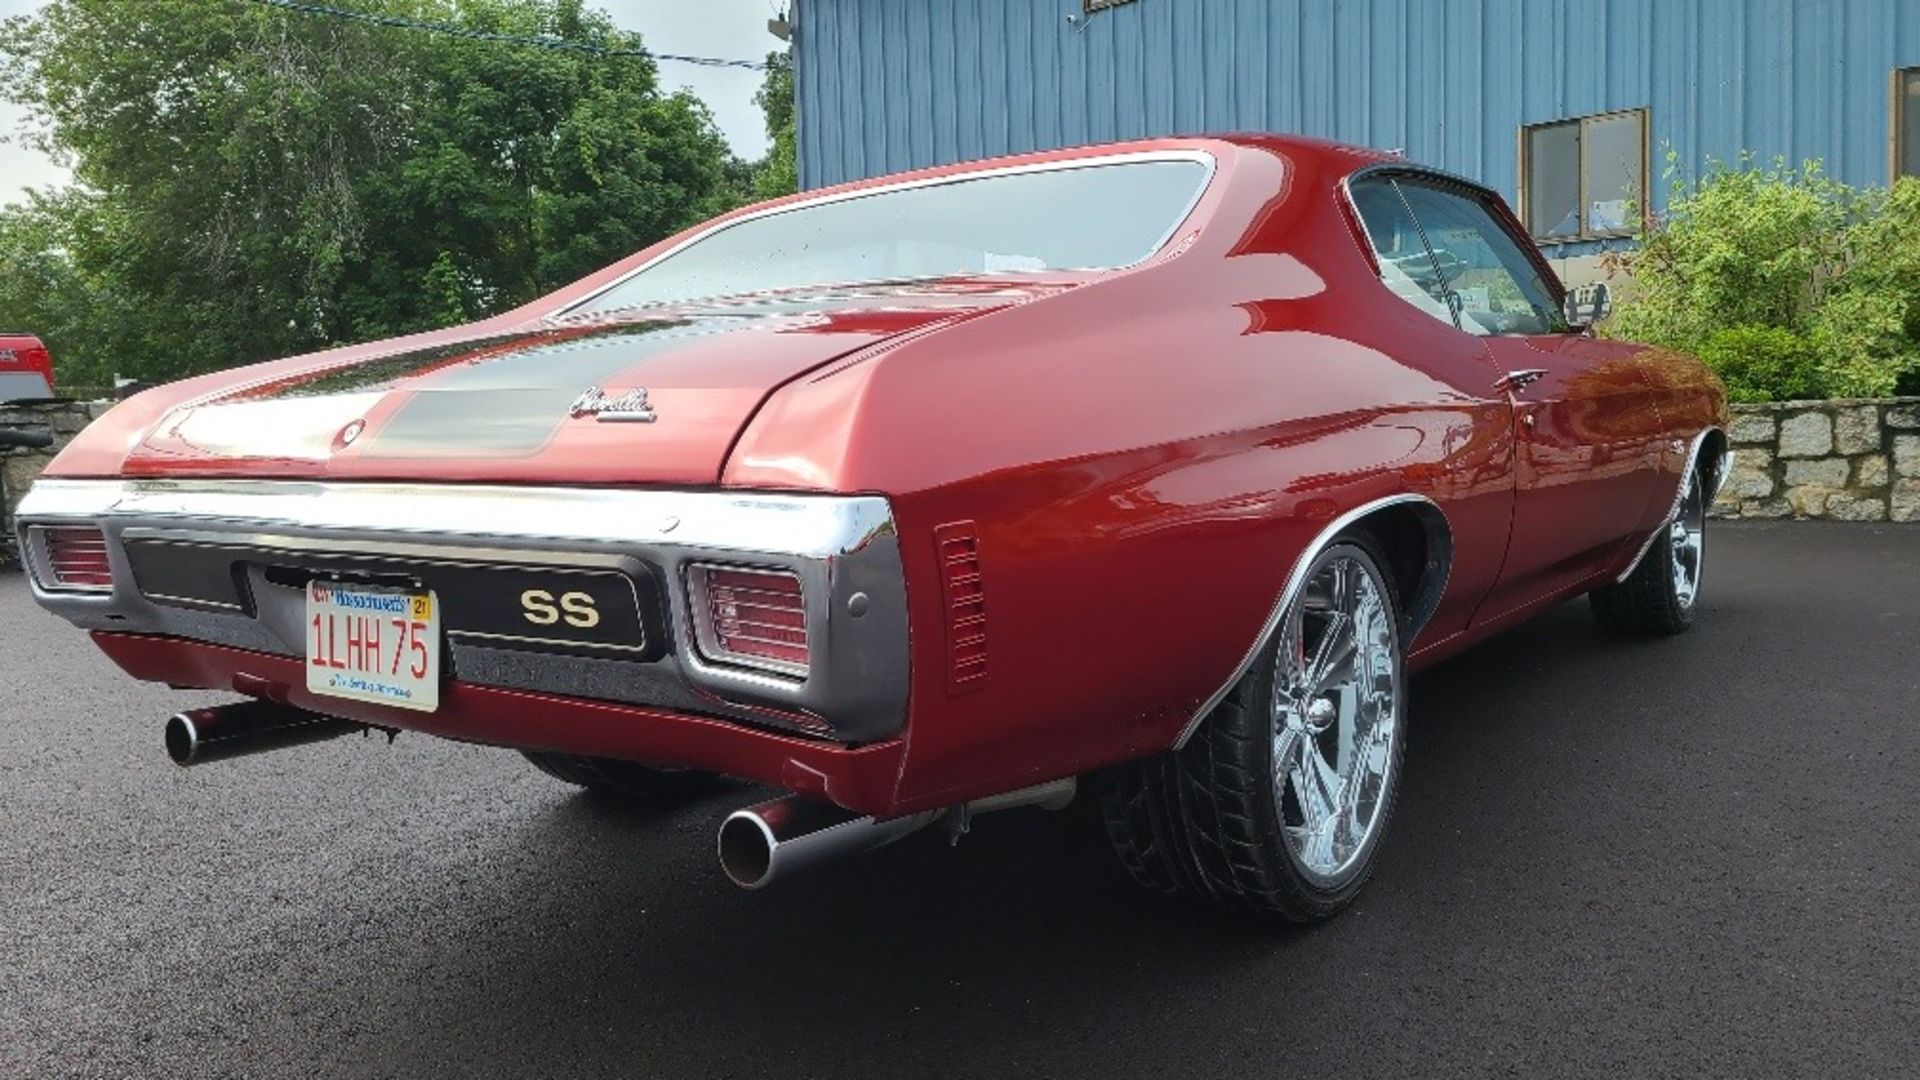 1970 Chevelle Ss - Image 11 of 18